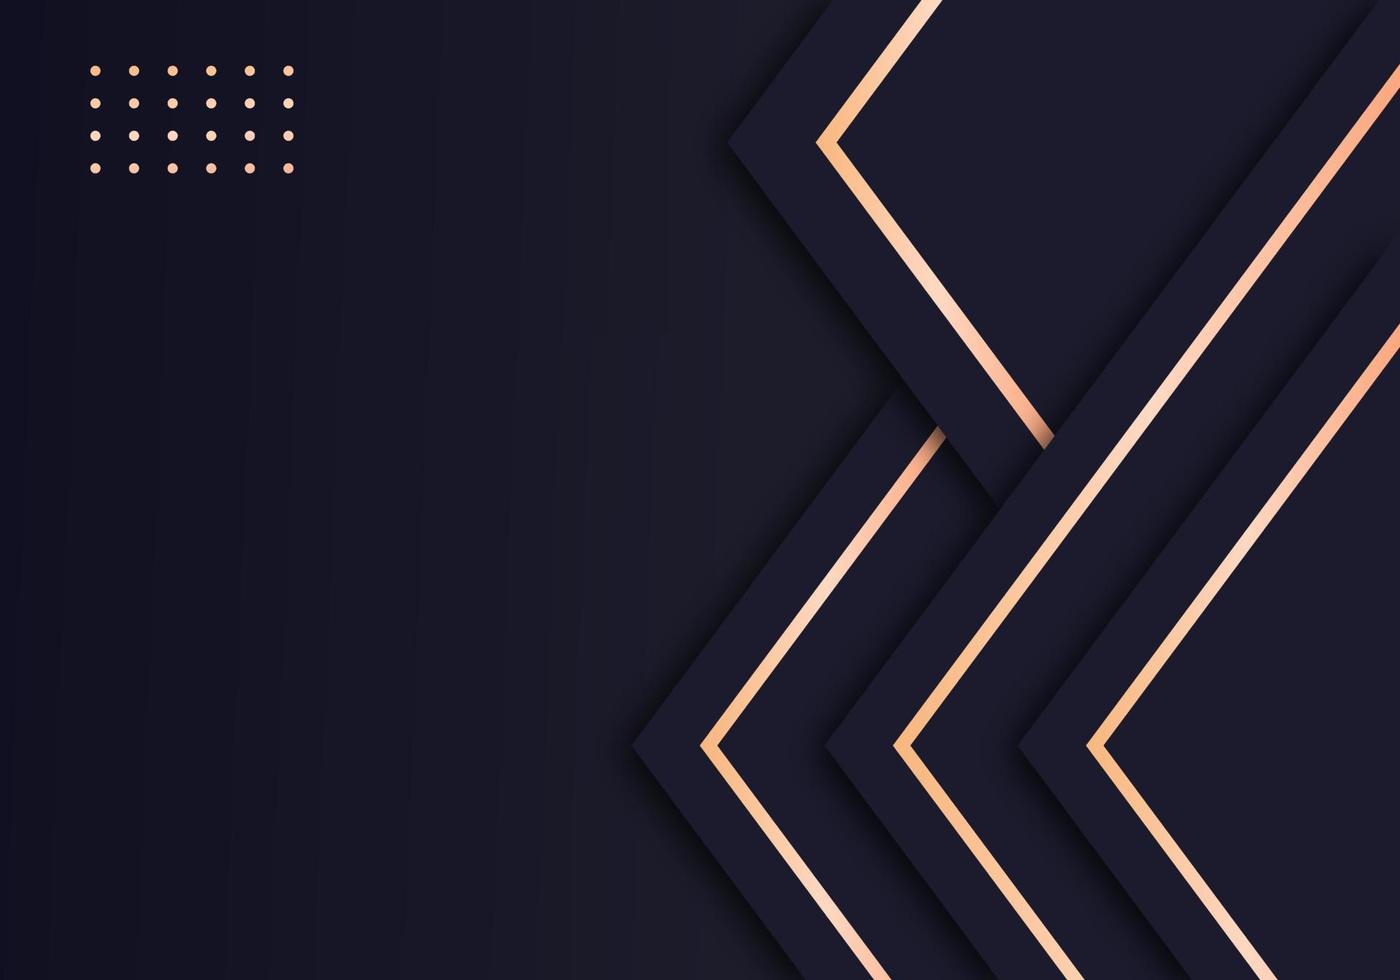 Abstract Shiny Gold Lines Diagonal Geometric Overlap Luxurious Dark Navy Purple Background with Copy Space for Text vector